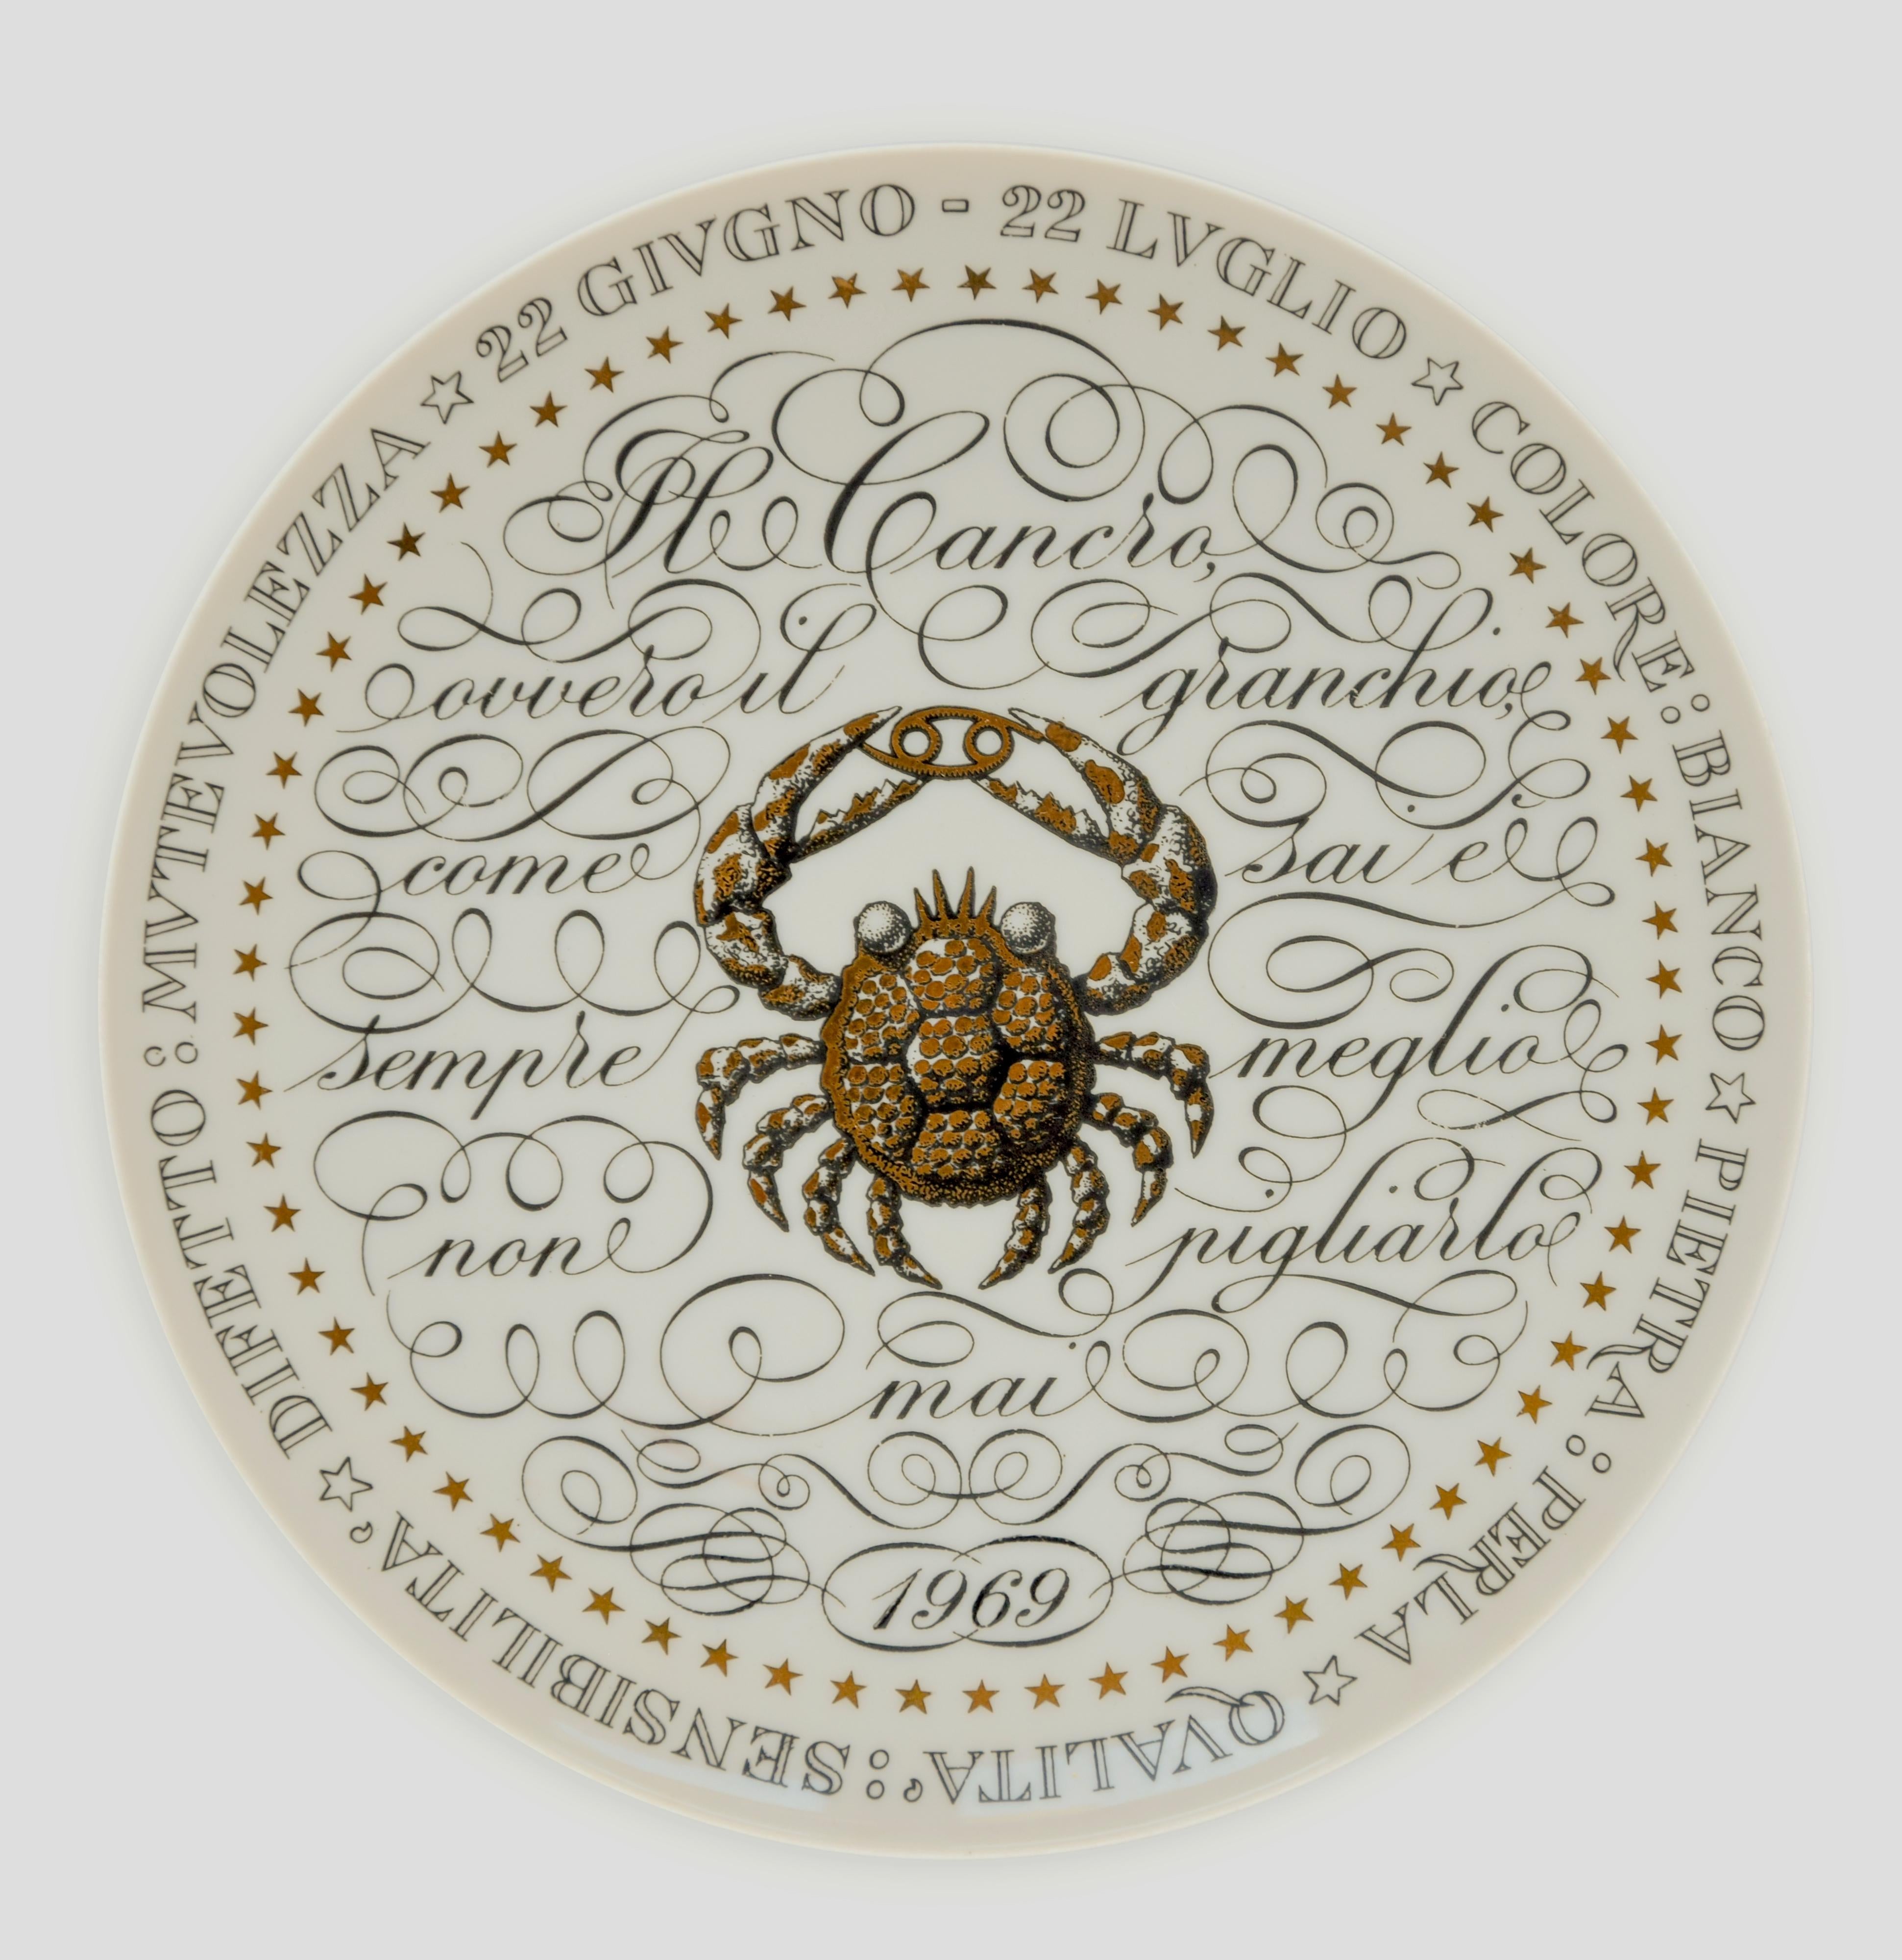 Porcelain Water Signs, Set of 3 Plates from Zodiac Plate Series by P. Fornasetti, 1965